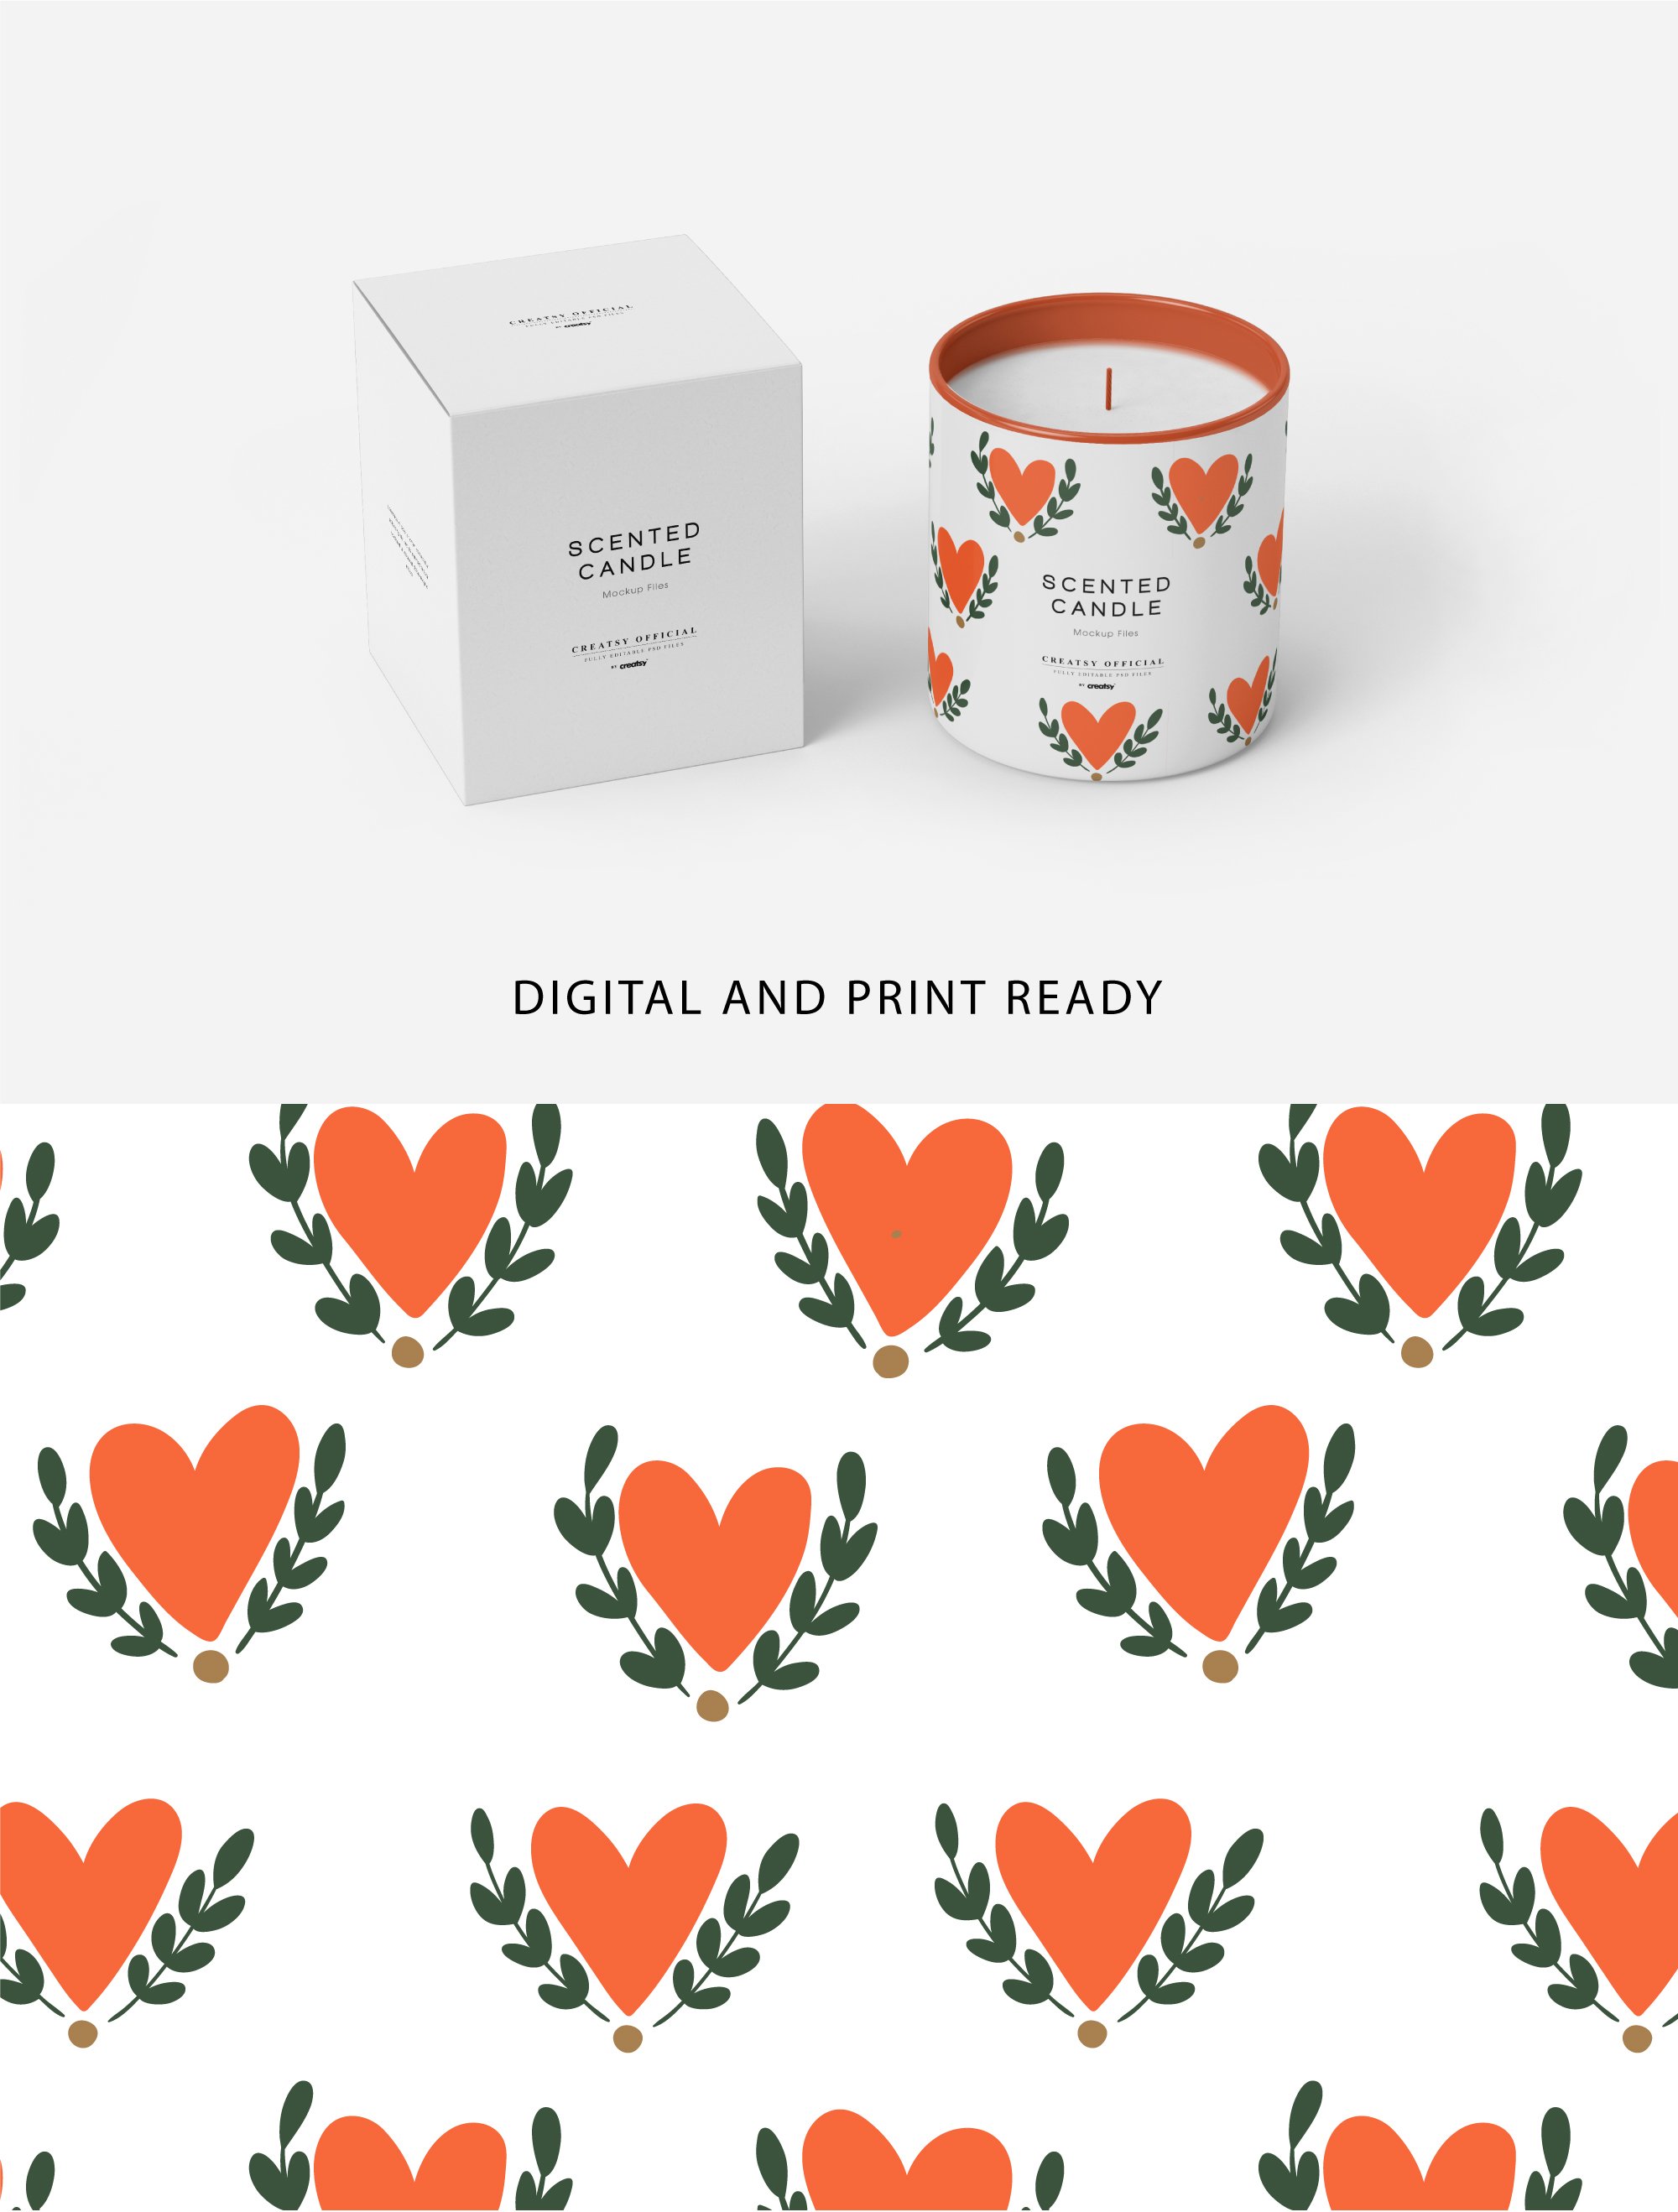 Orange hearts with leaves for the versatility brands.